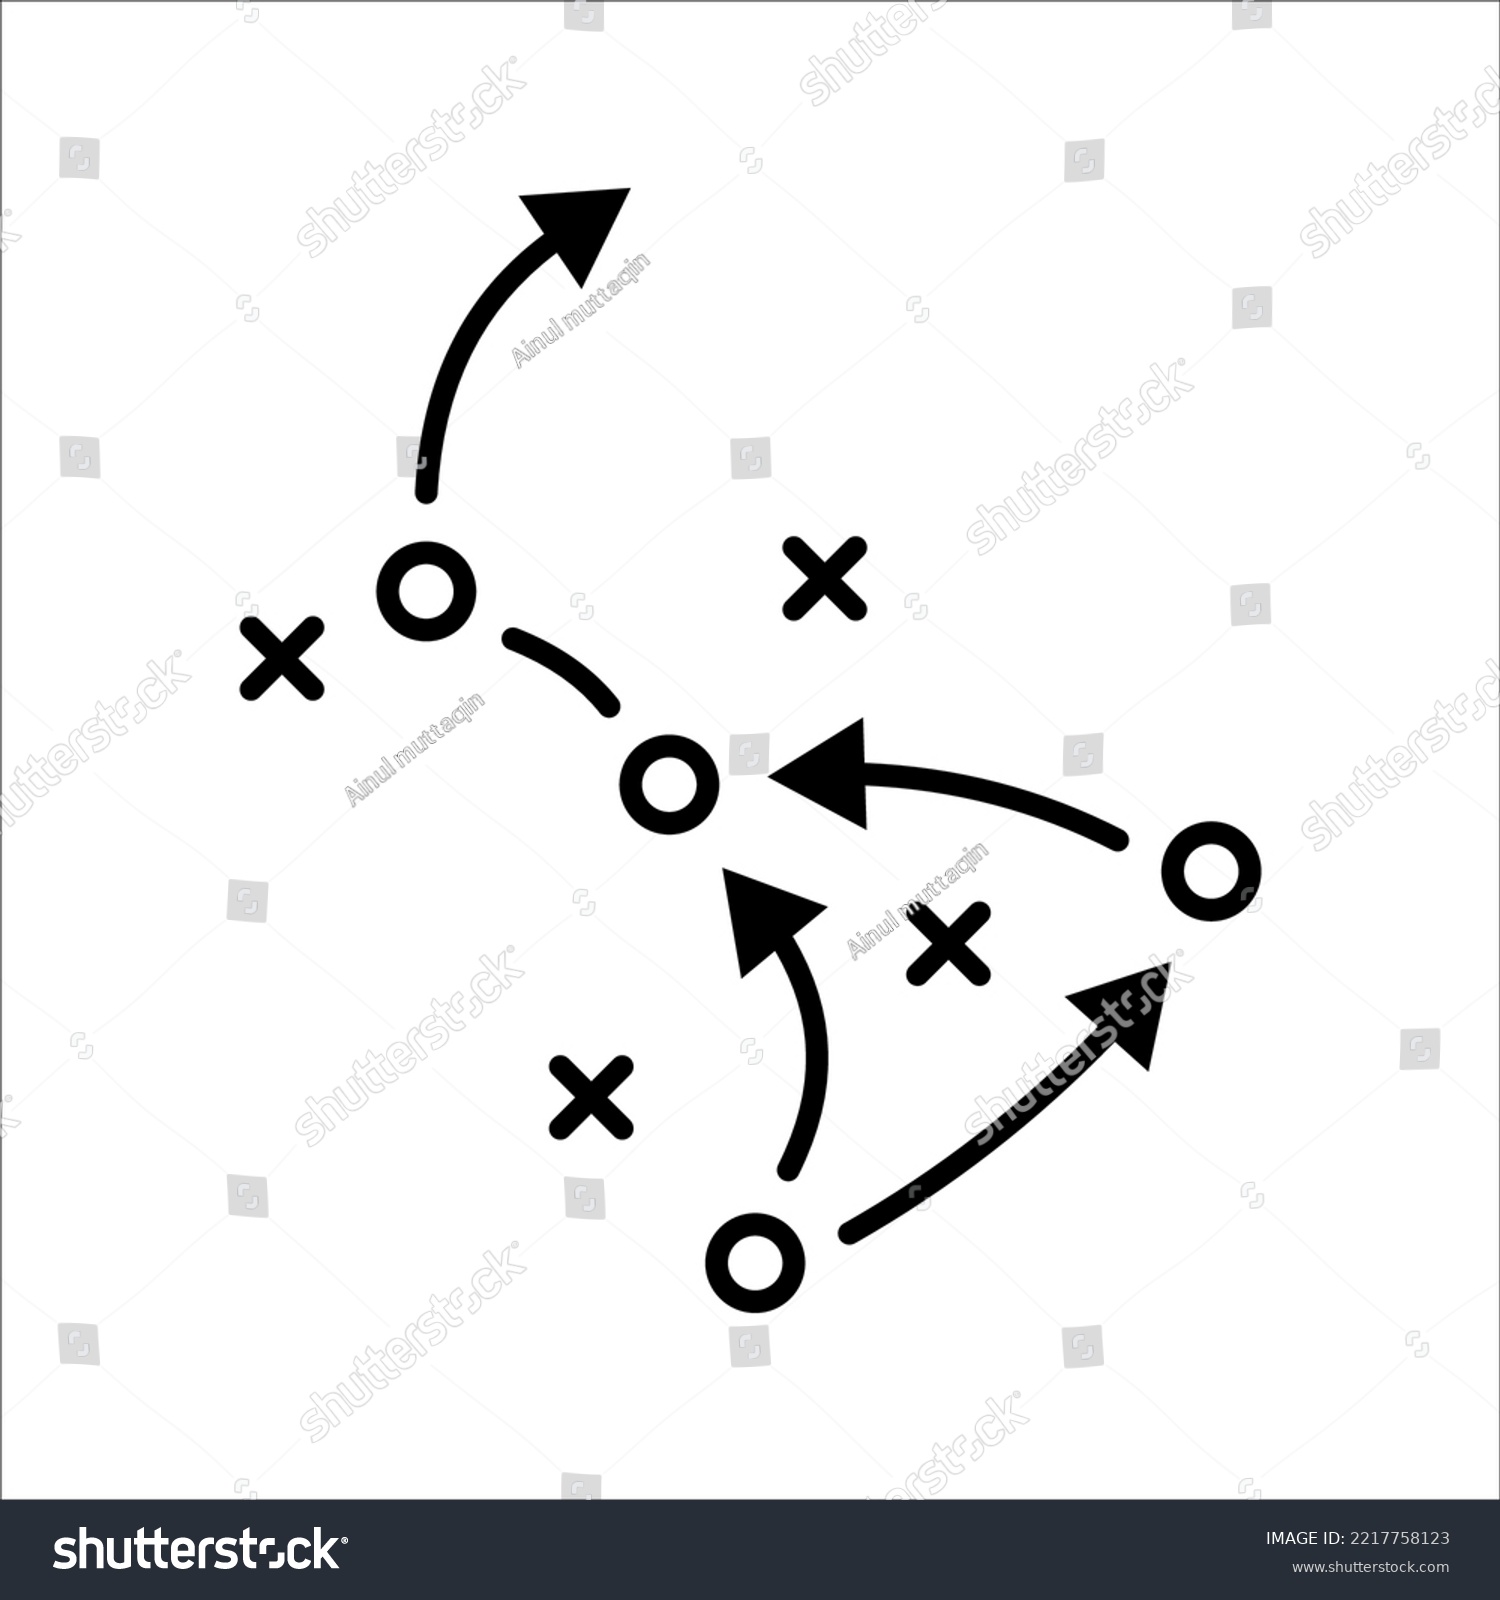 soccer tactics icon, game success strategy in football, scheme play, vector illustration on white background #2217758123